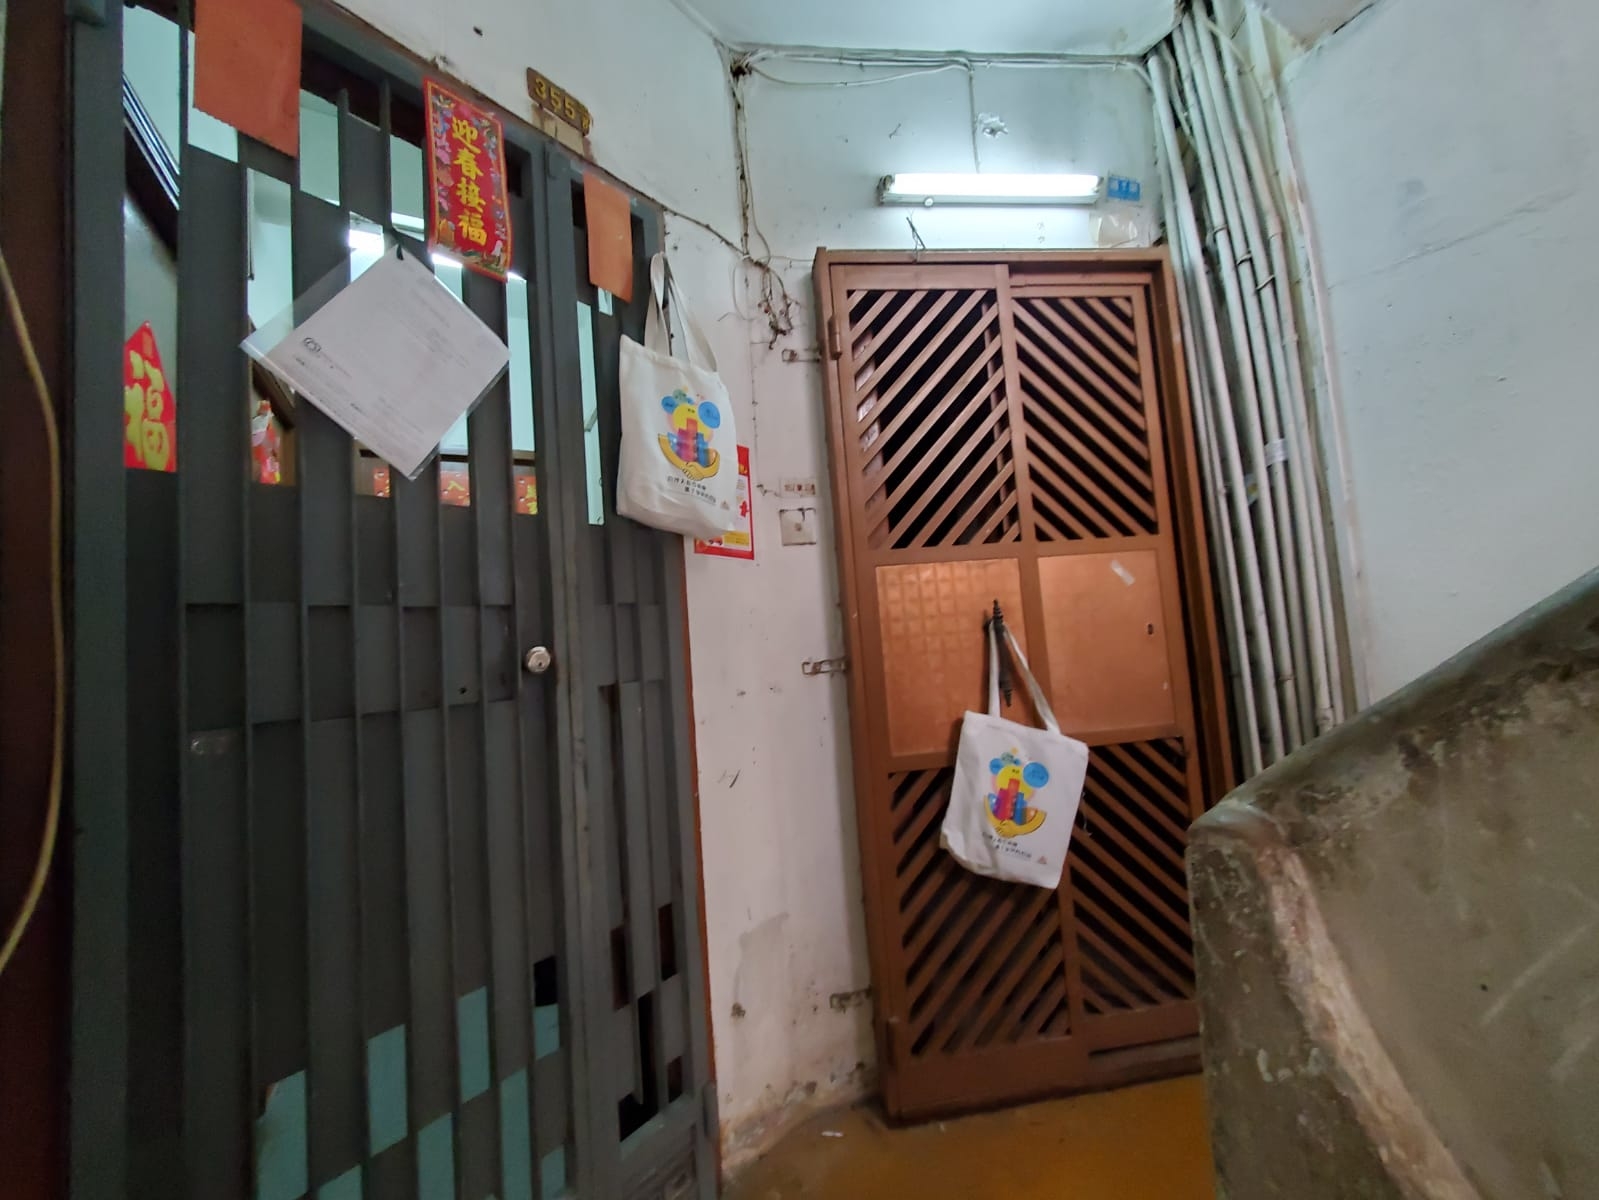 Promotion of Quality Building Management (providing cleansing services for the common areas of the buildings, distributing leaflets and souvenirs to the residents) 